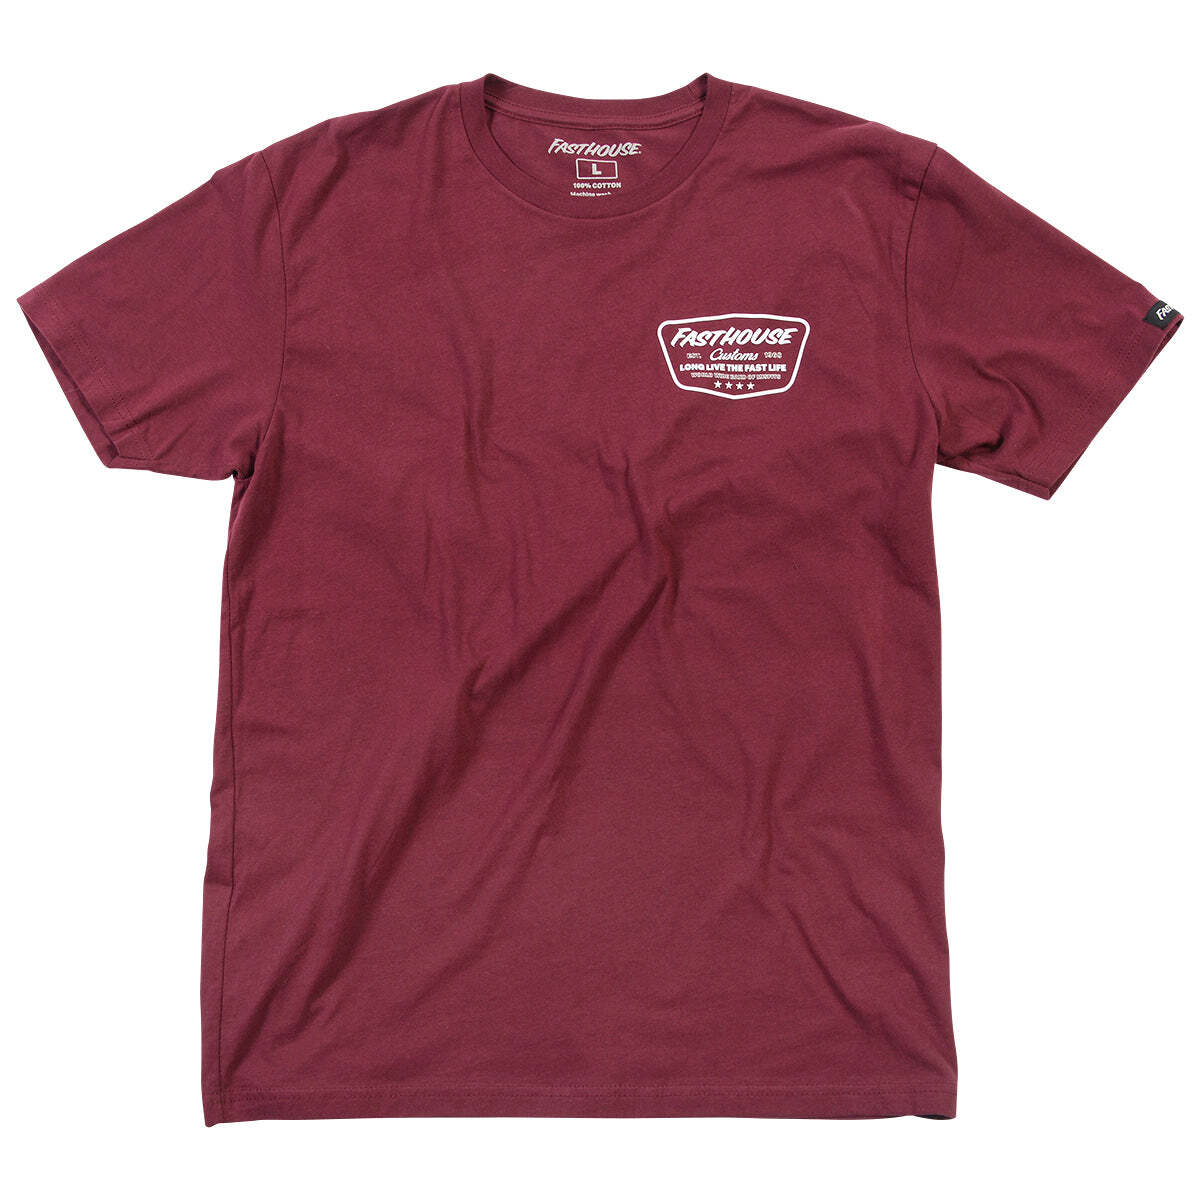 Fasthouse Crest Tee - Maroon - FASTHOUSE